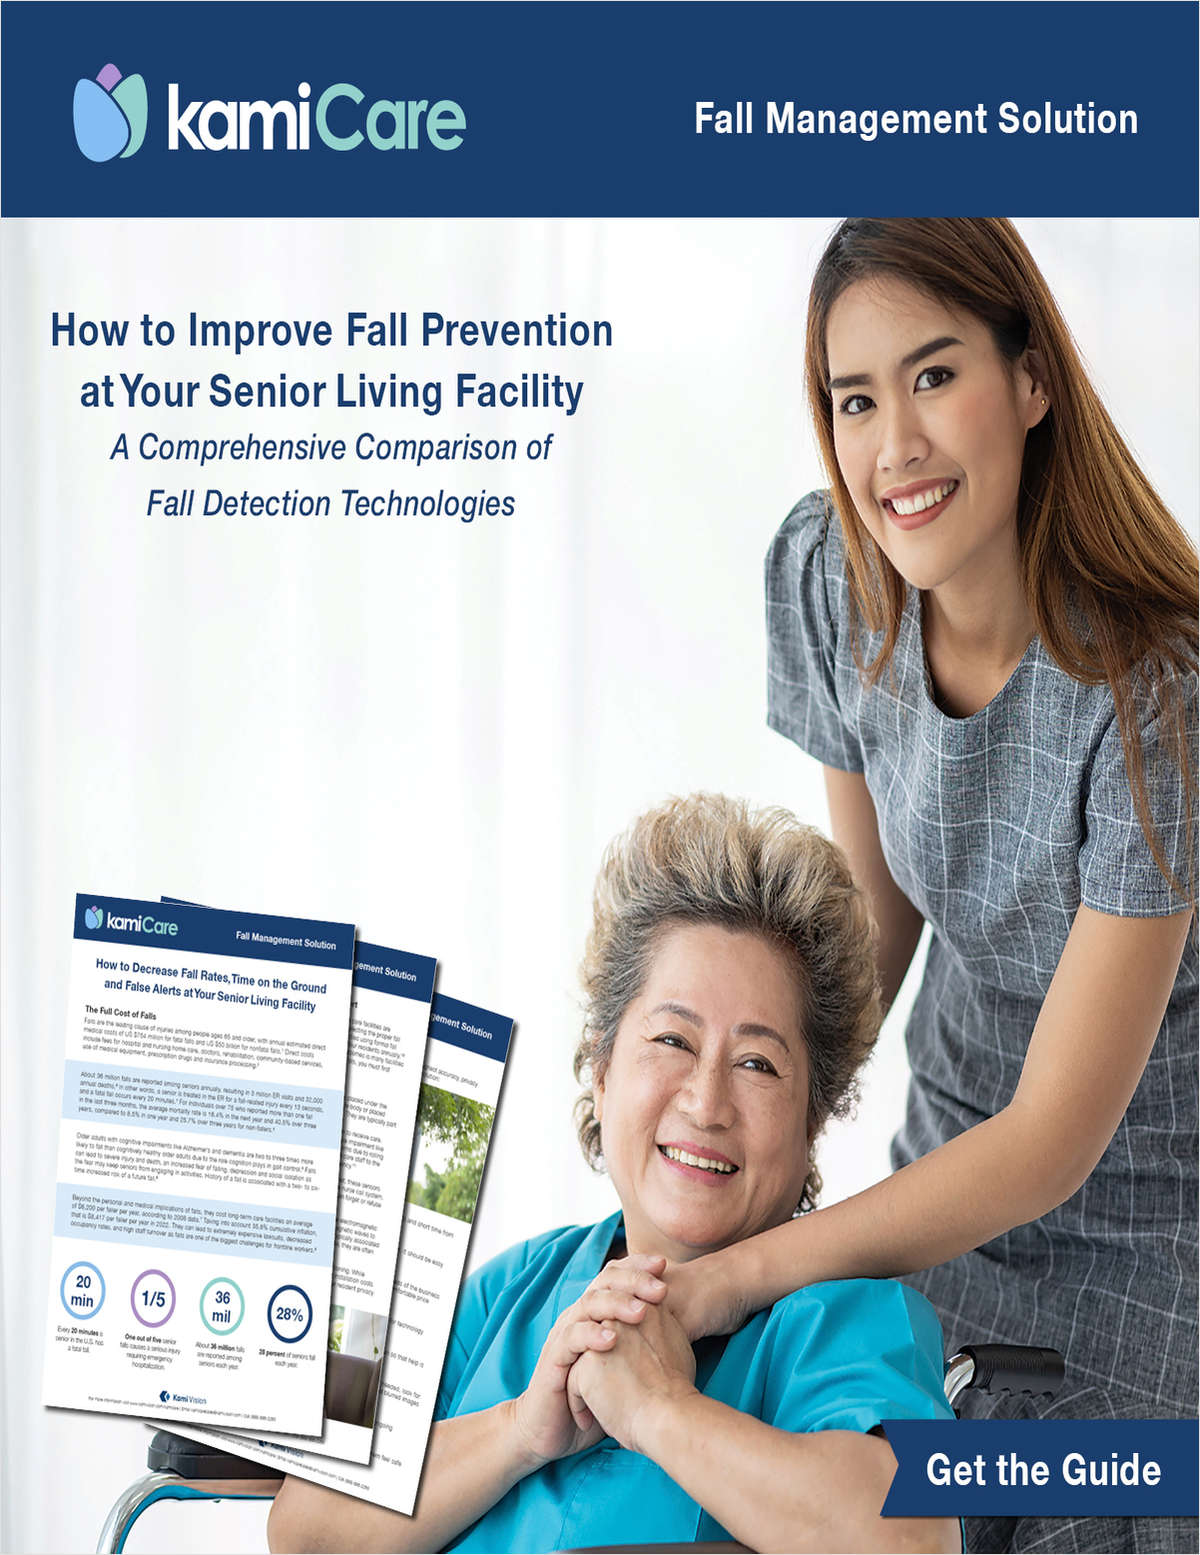 How to Improve Fall Prevention at Your Senior Living Facility: A Comprehensive Comparison of Fall Detection Technologies